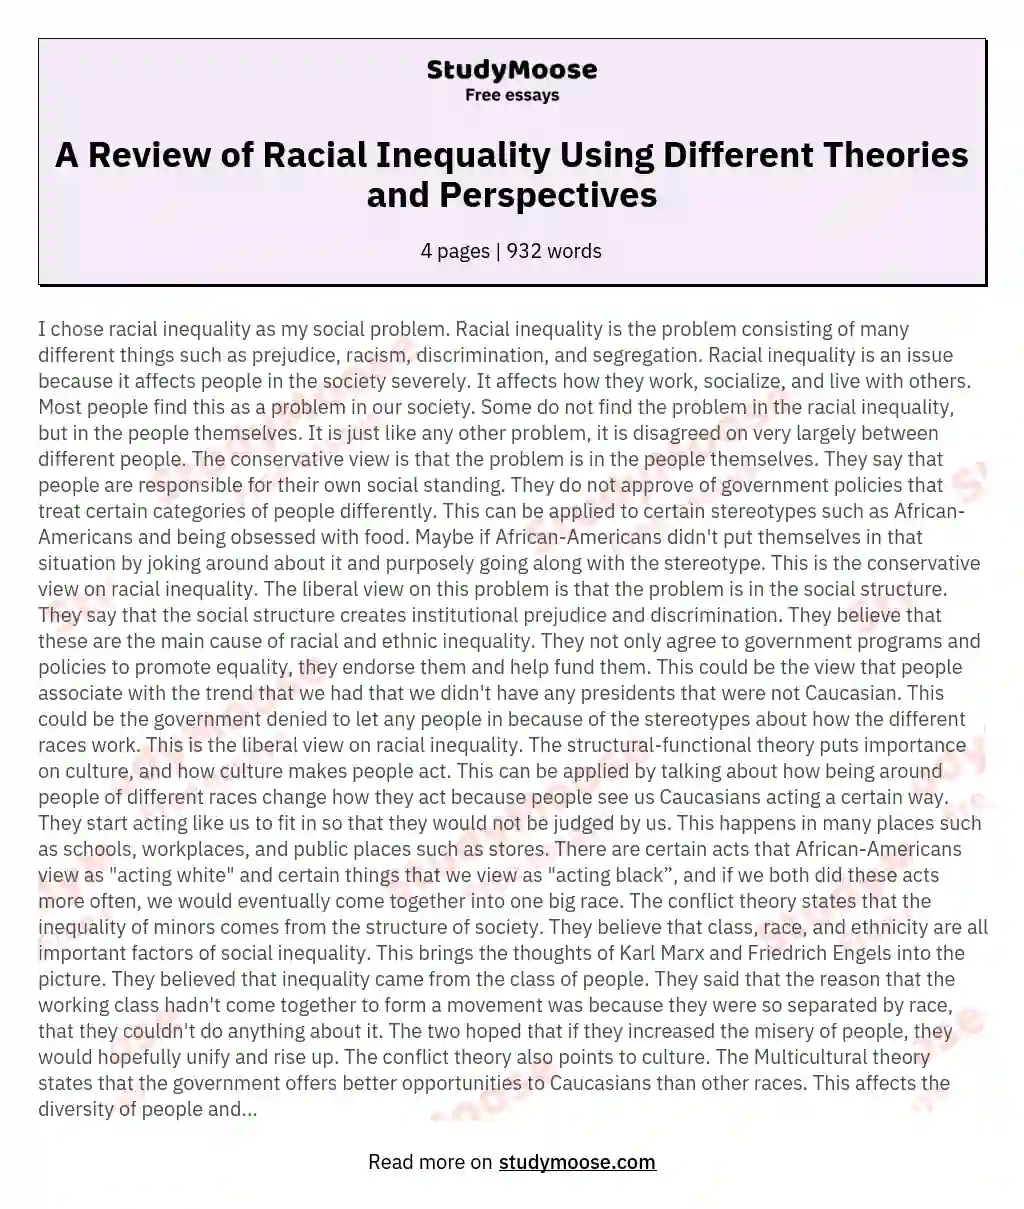 A Review of Racial Inequality Using Different Theories and Perspectives essay